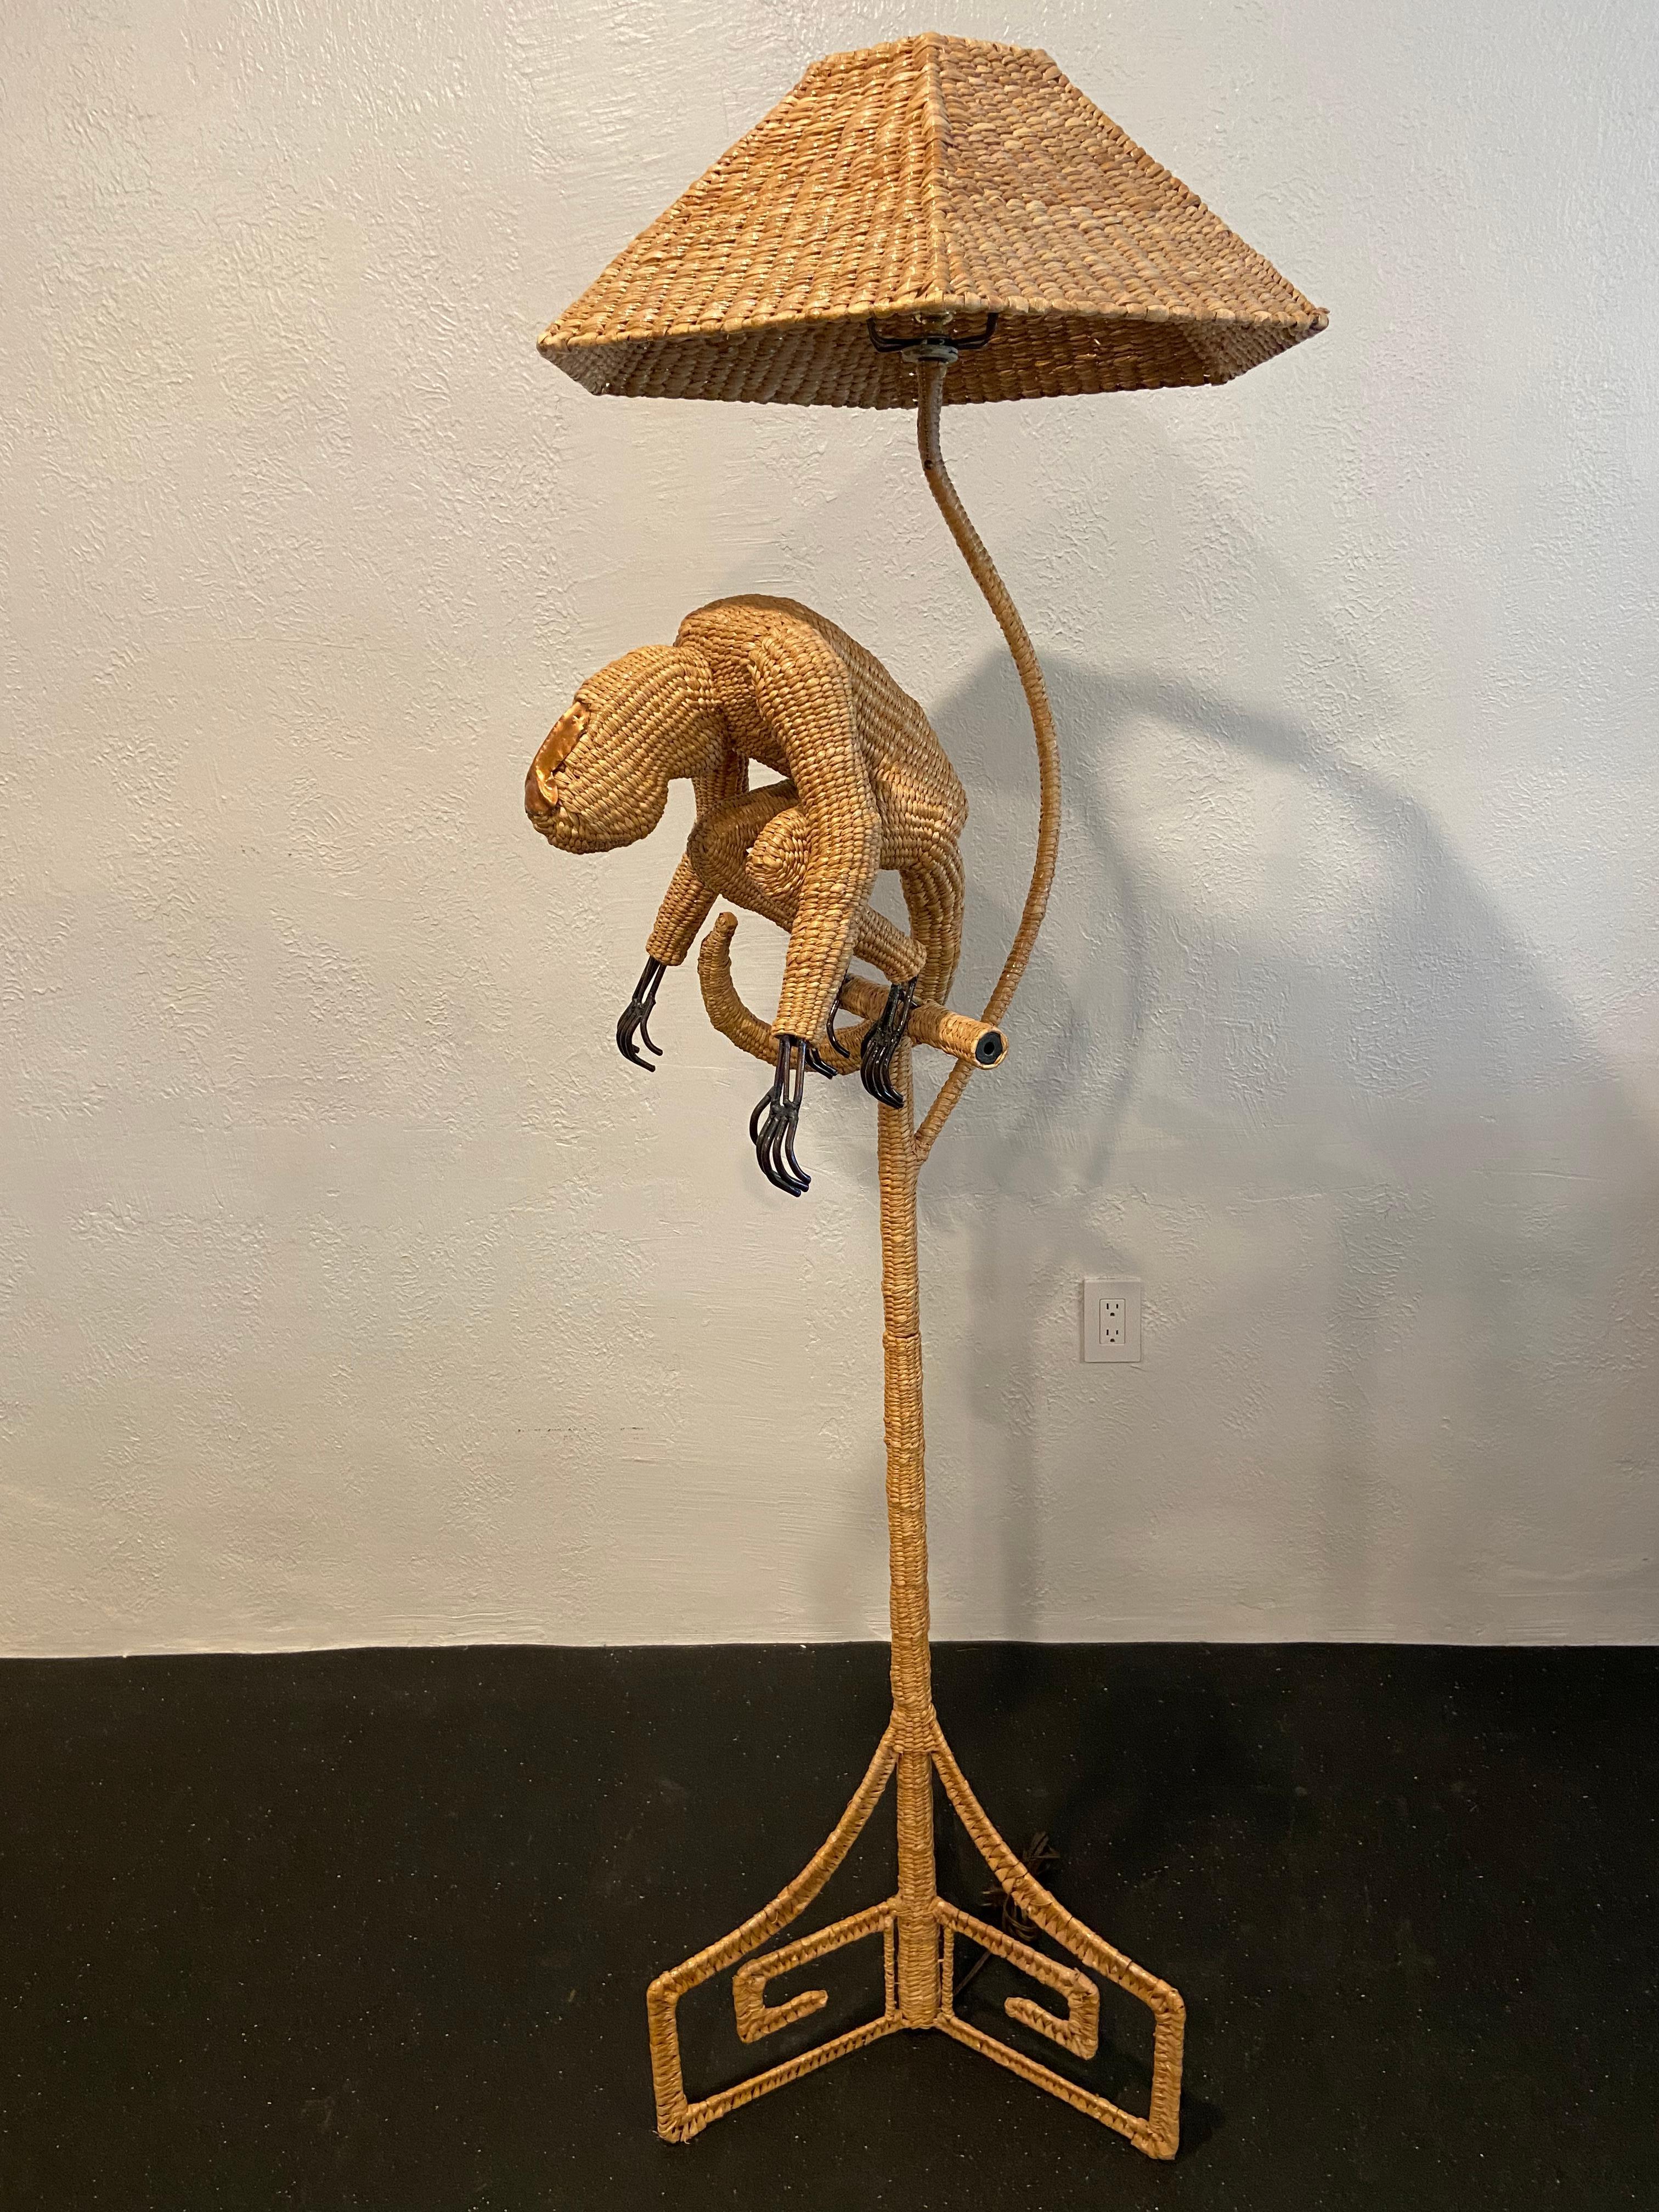 Mario Lopez Torres monkey floor lamp. Unsigned. Original hardware and wiring. 

Would work well in a variety of interiors such as modern, mid century modern, Hollywood regency, etc. Piece blends seamlessly with other designers such as Warren